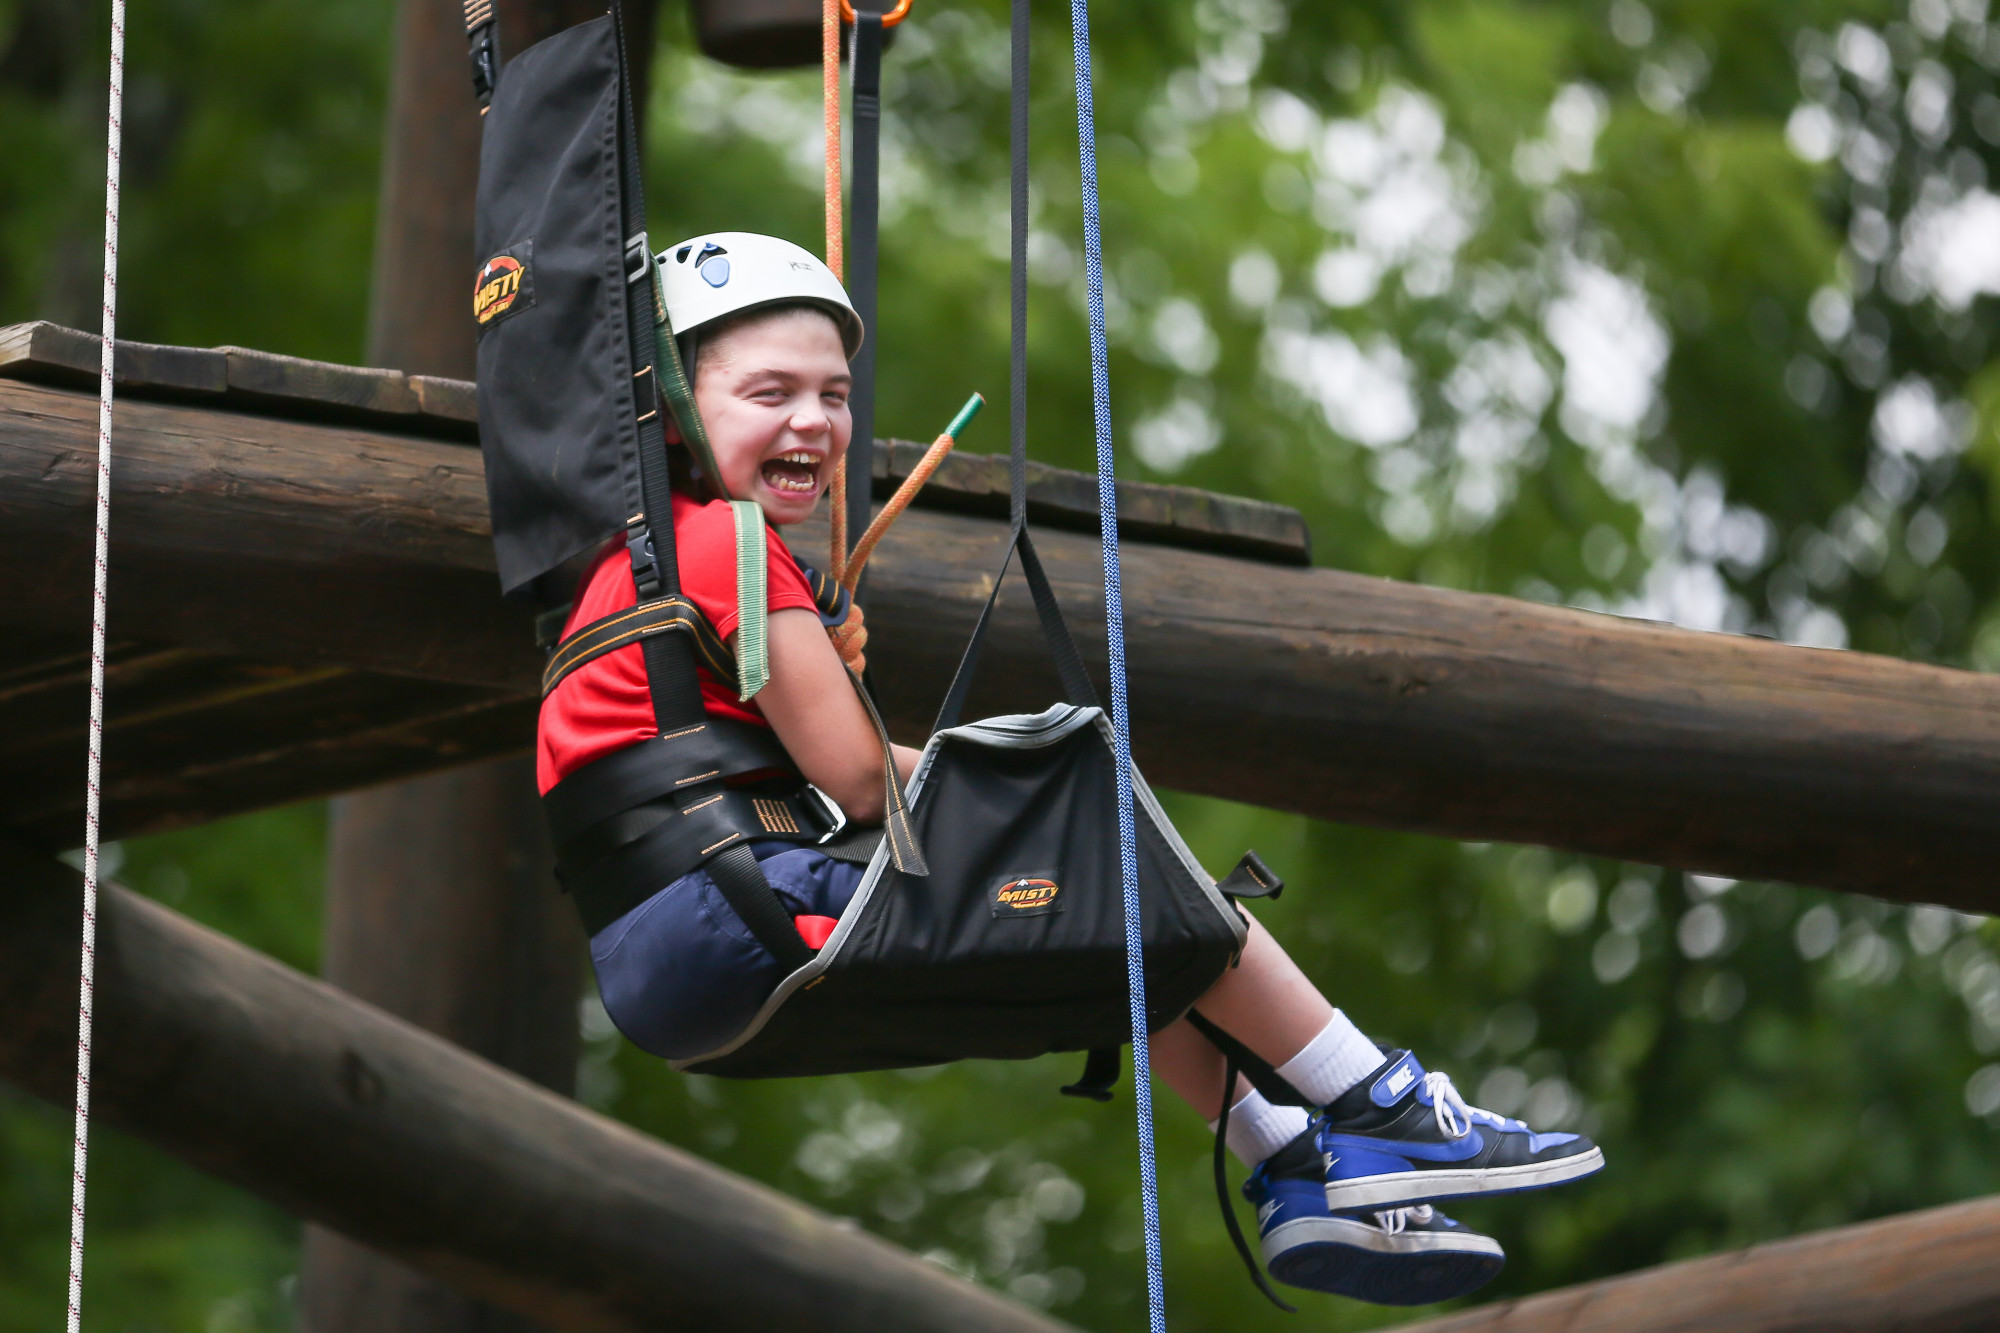 A picture of a smiling child in a specialist hoist surrounded by a wooden climbing structure amongst the trees